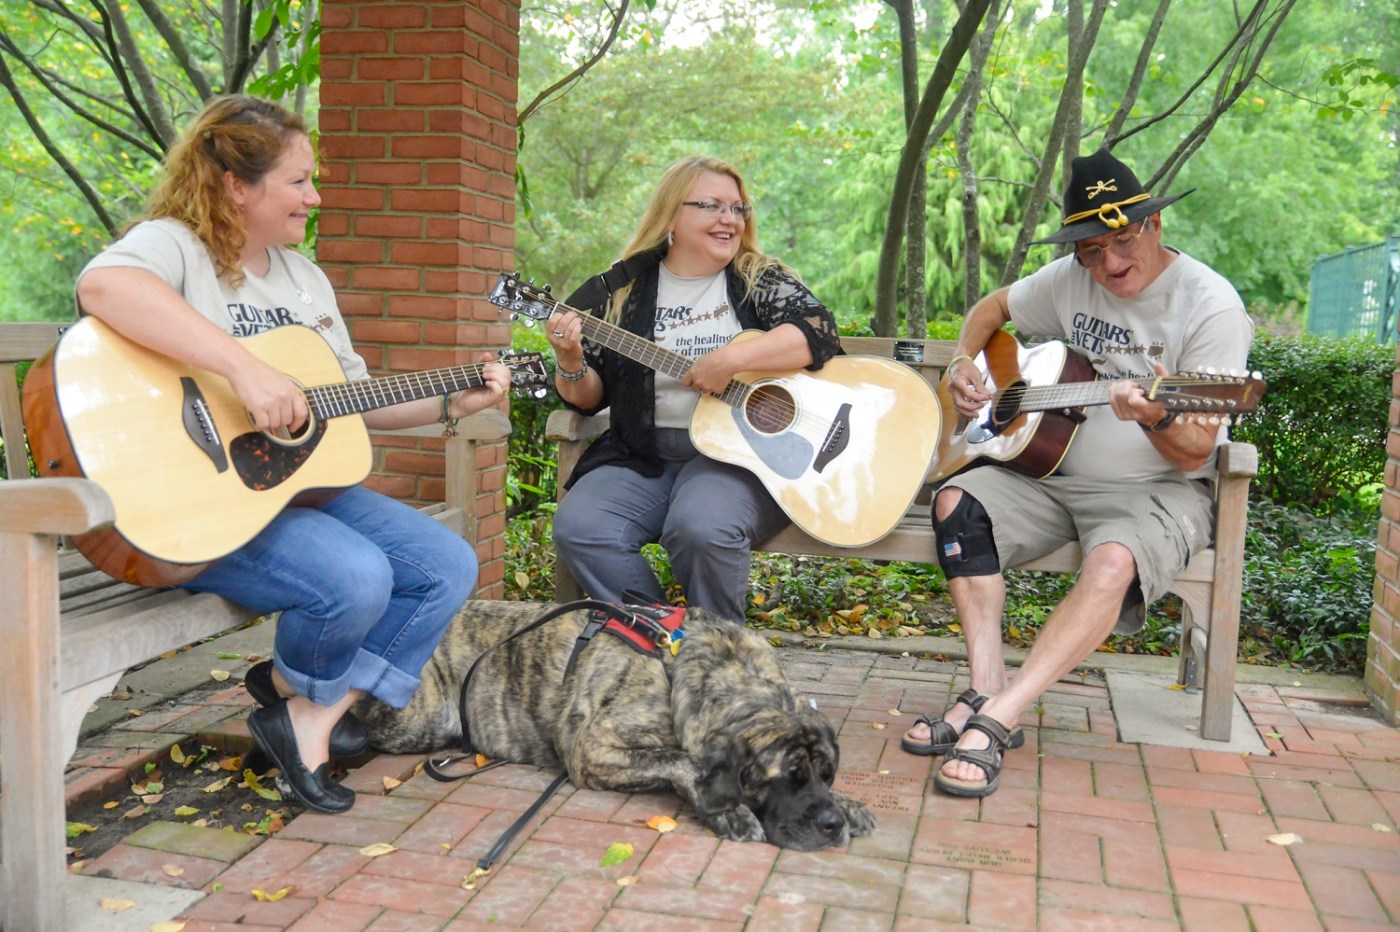 Two women and a man play guitars while a dog sits at their feet.